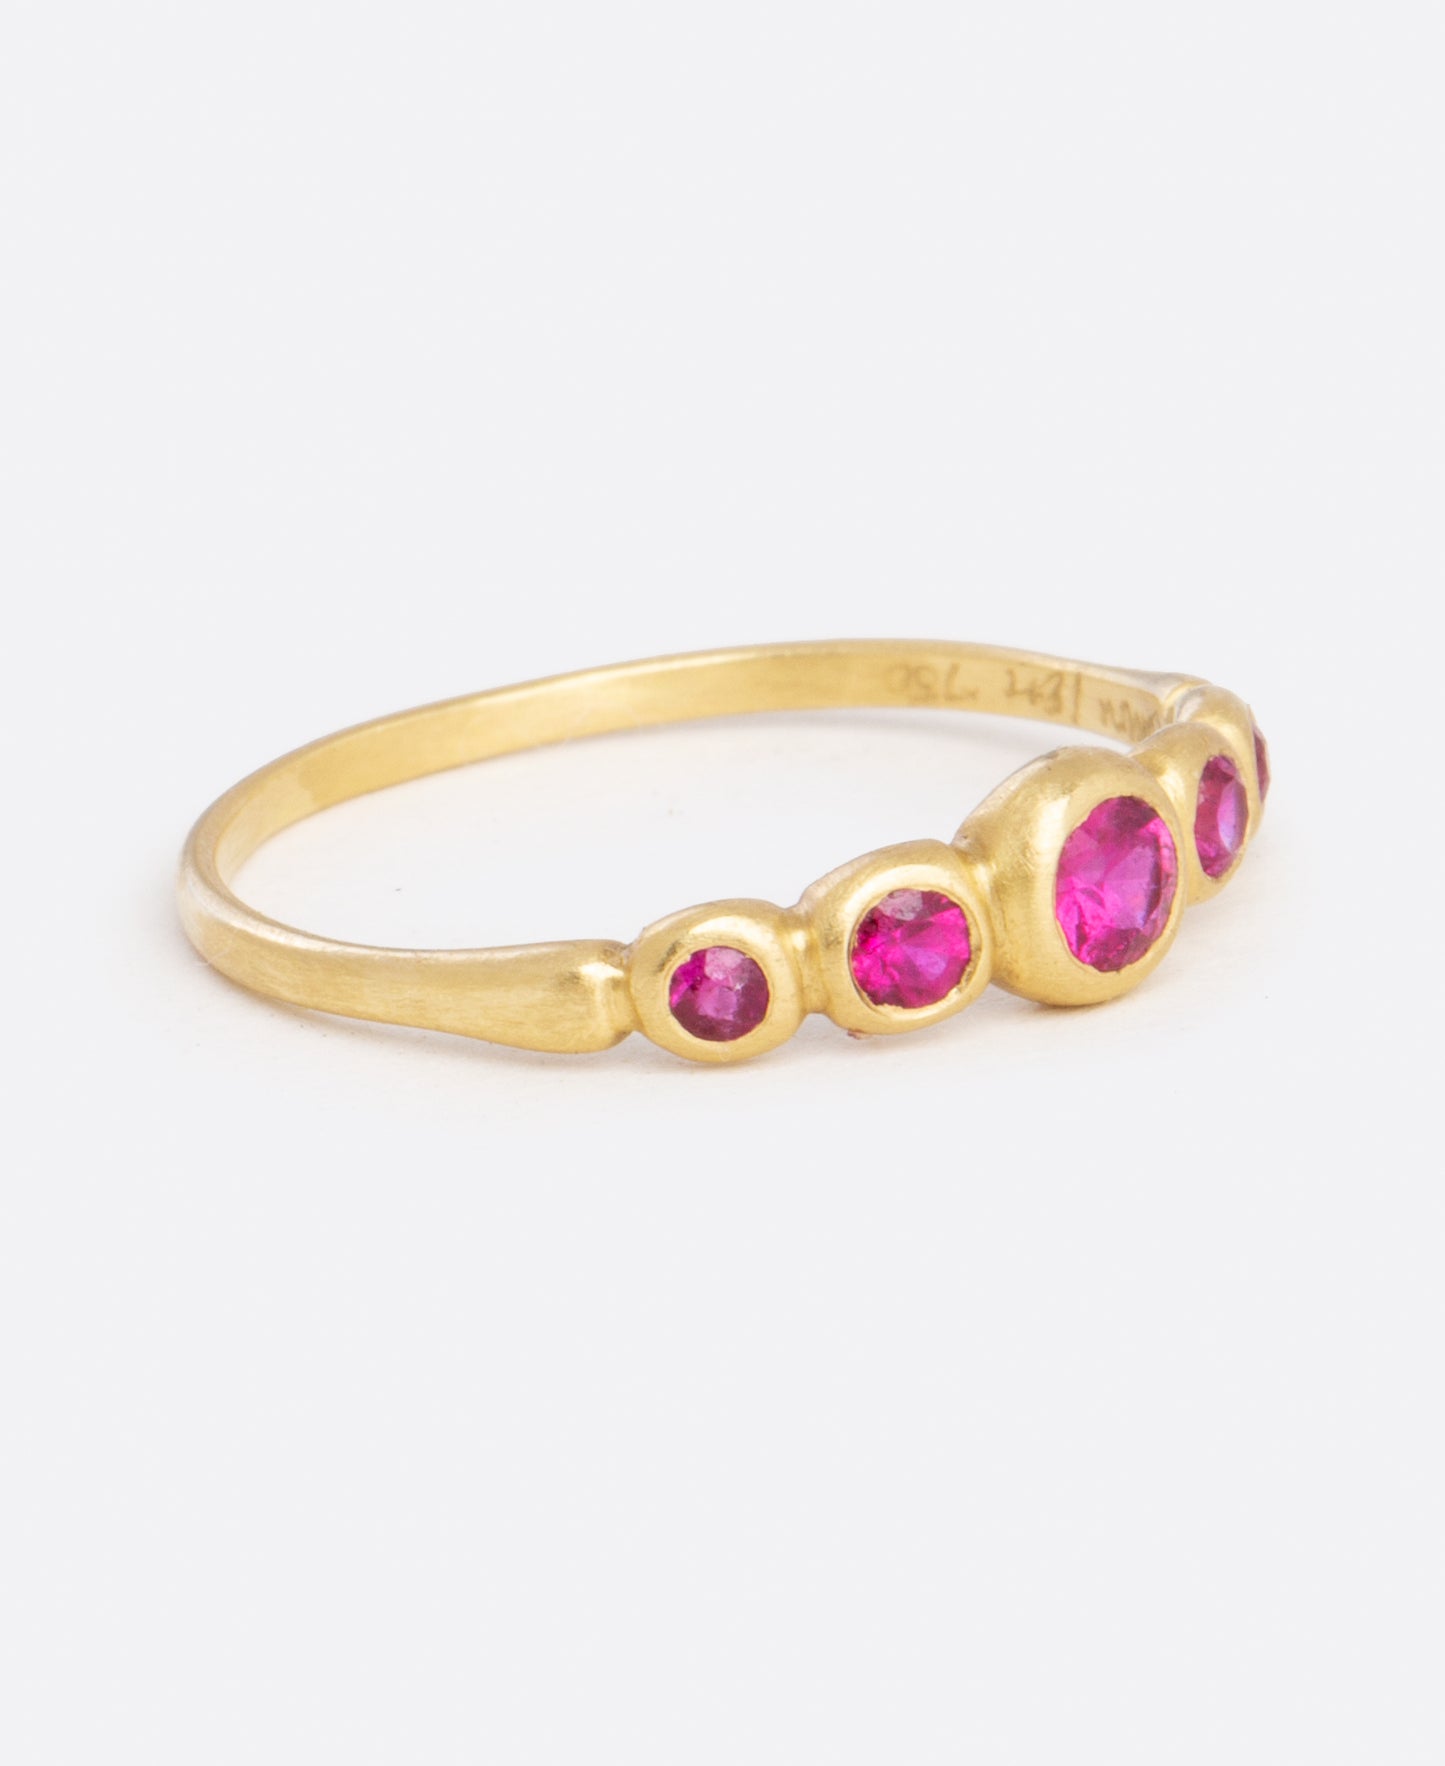 A classic combo, ruby and yellow gold, make up this ring with graduated sizes of stones.